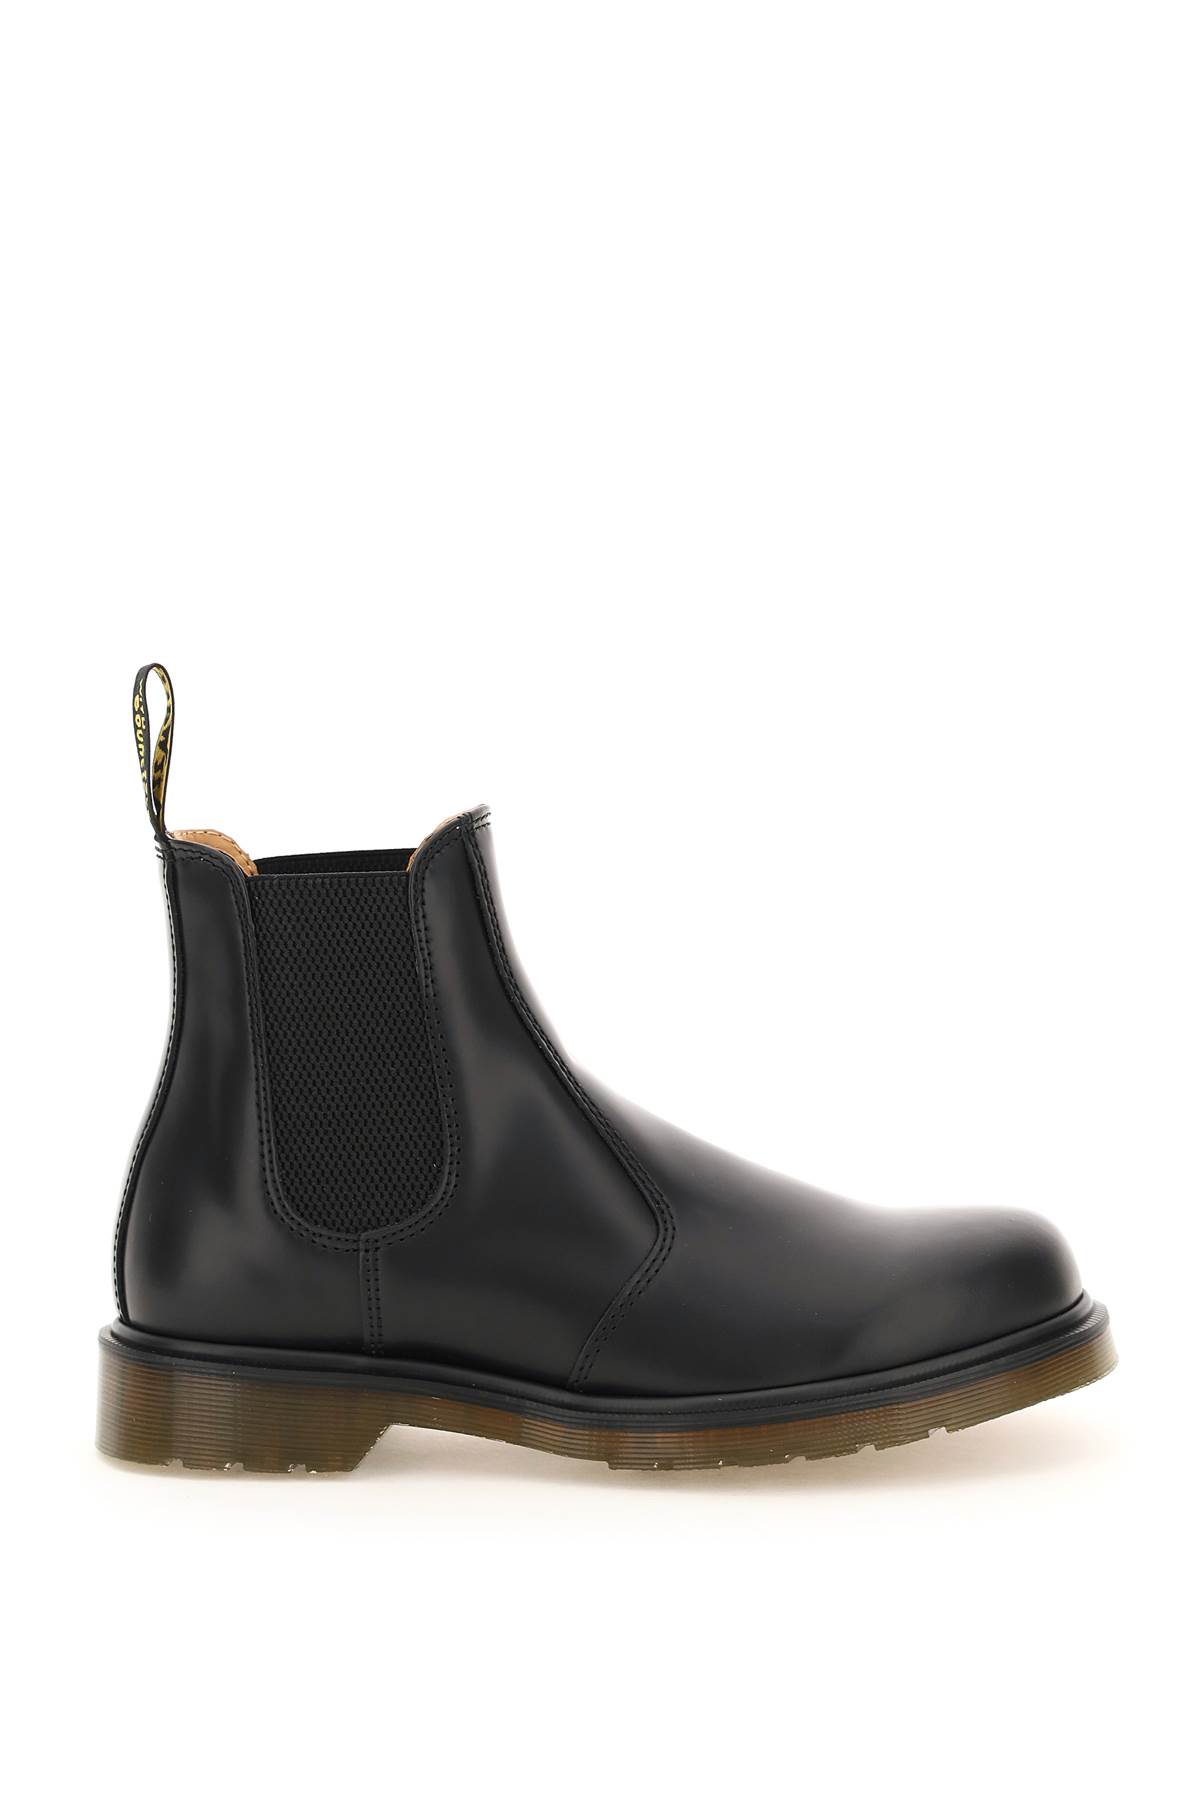 Dr. Martens Smooth Leather 2976 Chelsea Boots